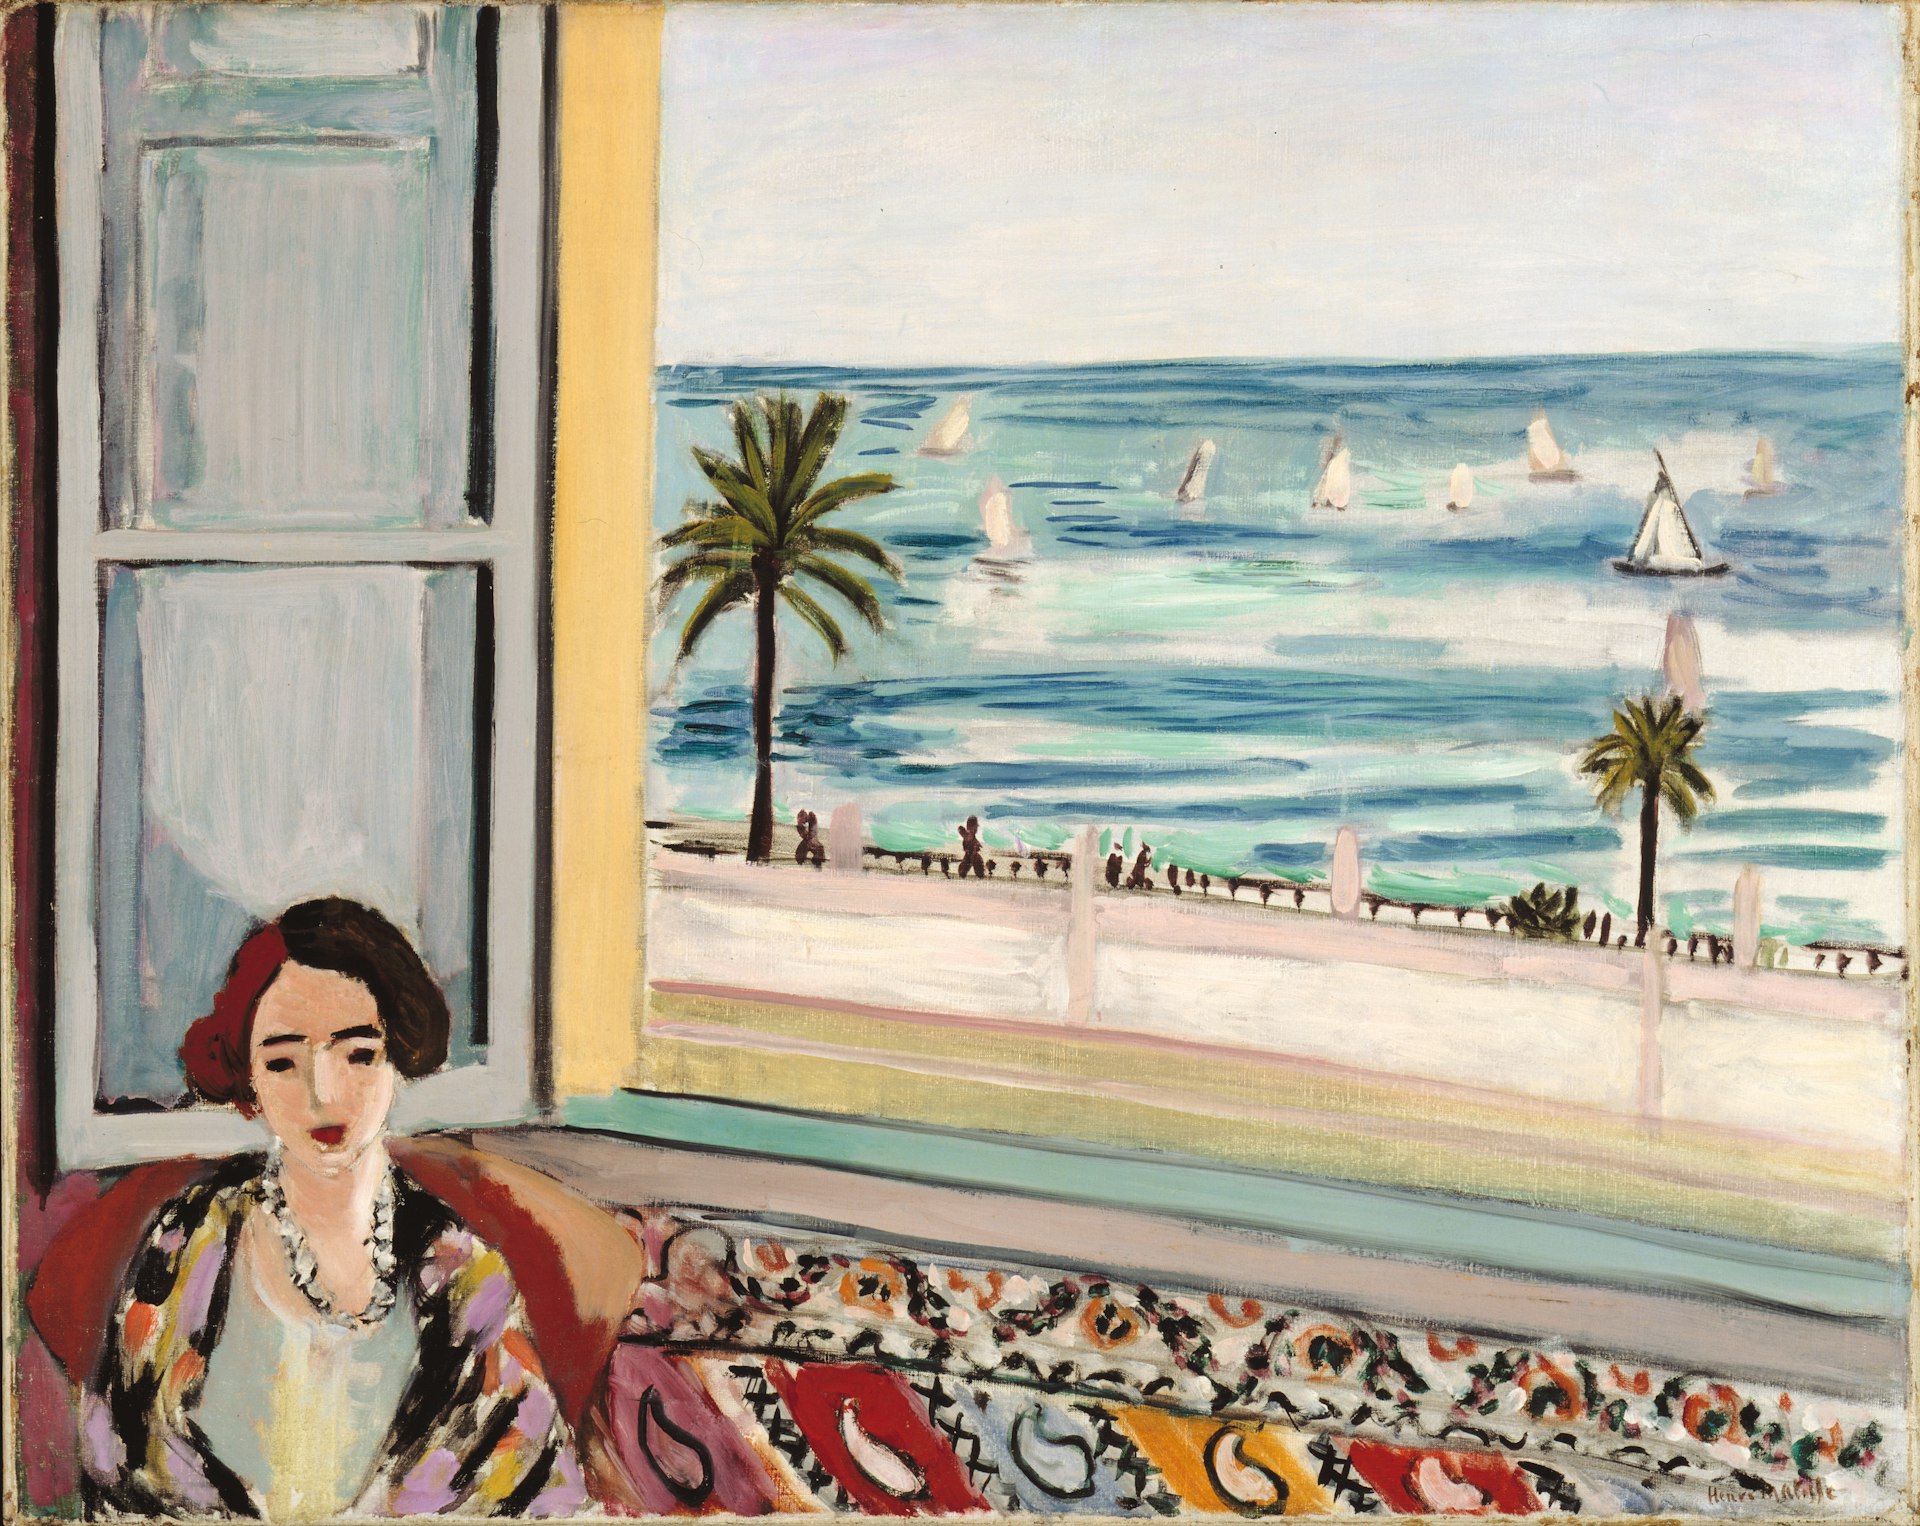 The painting "Seated Woman, Back Turned to the Open Window" (ca 1922) by Henri Matisse